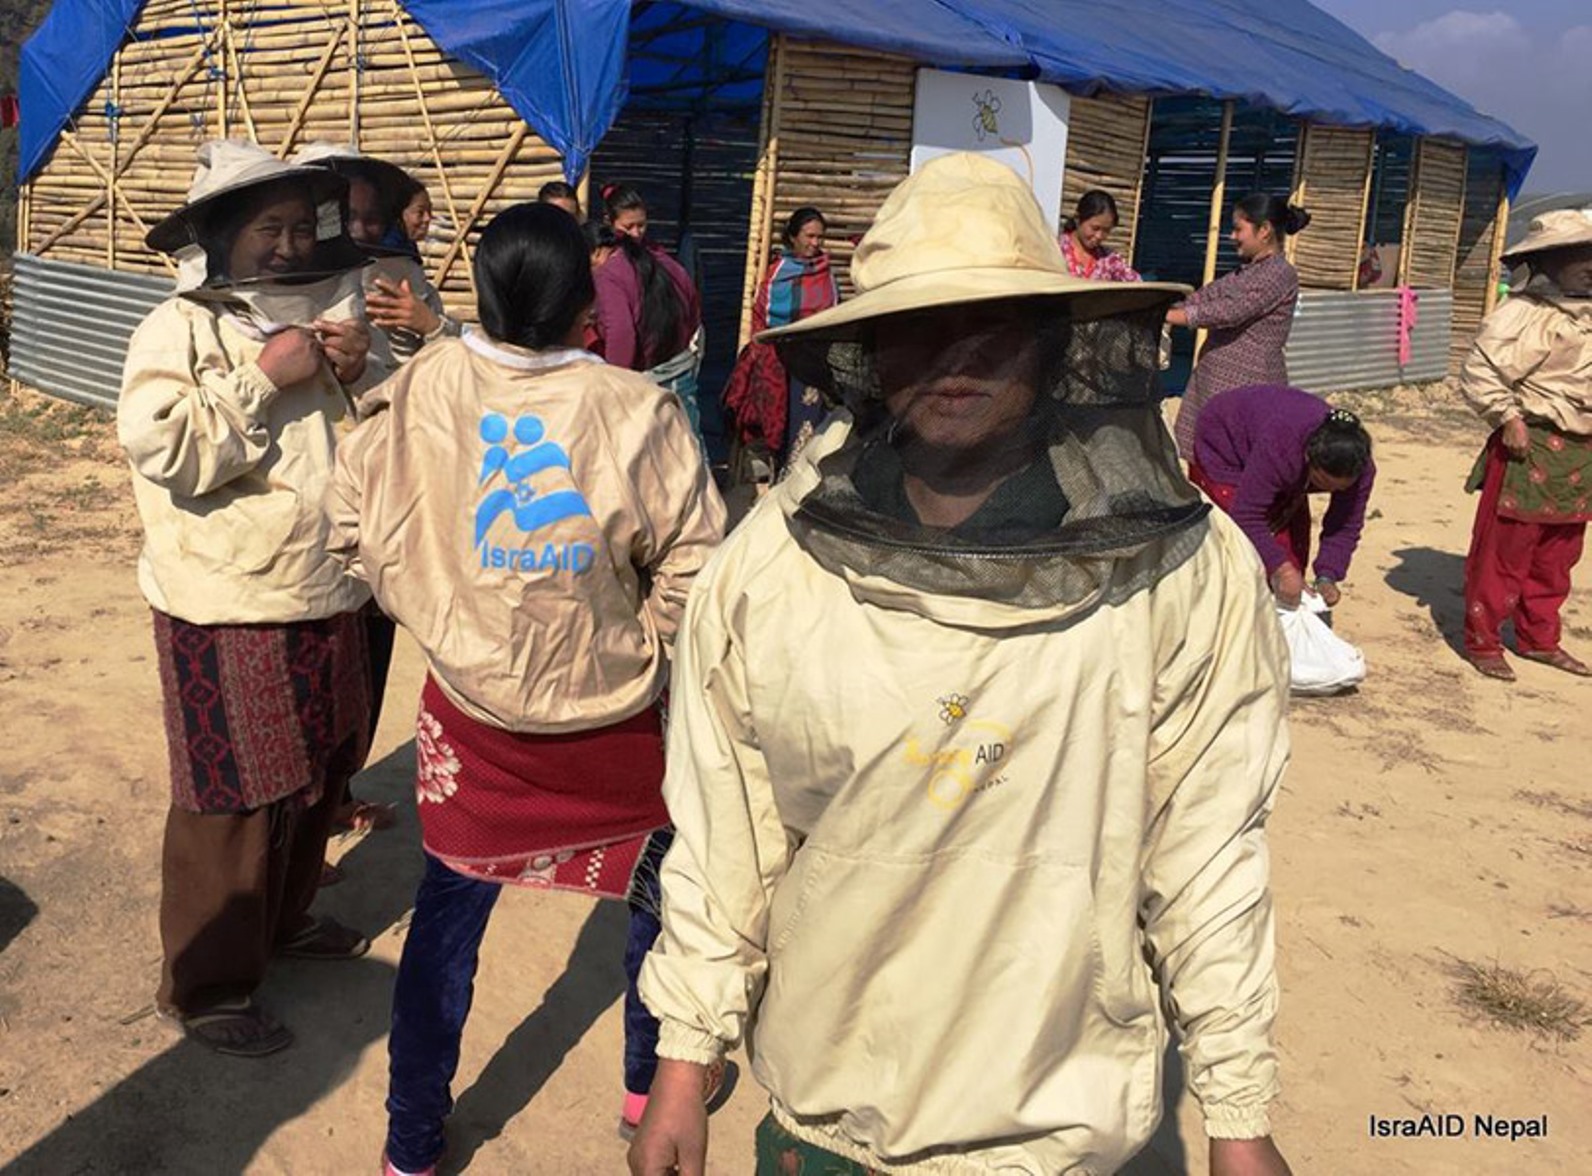 IsraAID’s HoneyAID project equips and trains Nepalese women to be beekeepers. Photo courtesy of IsraAID Nepal